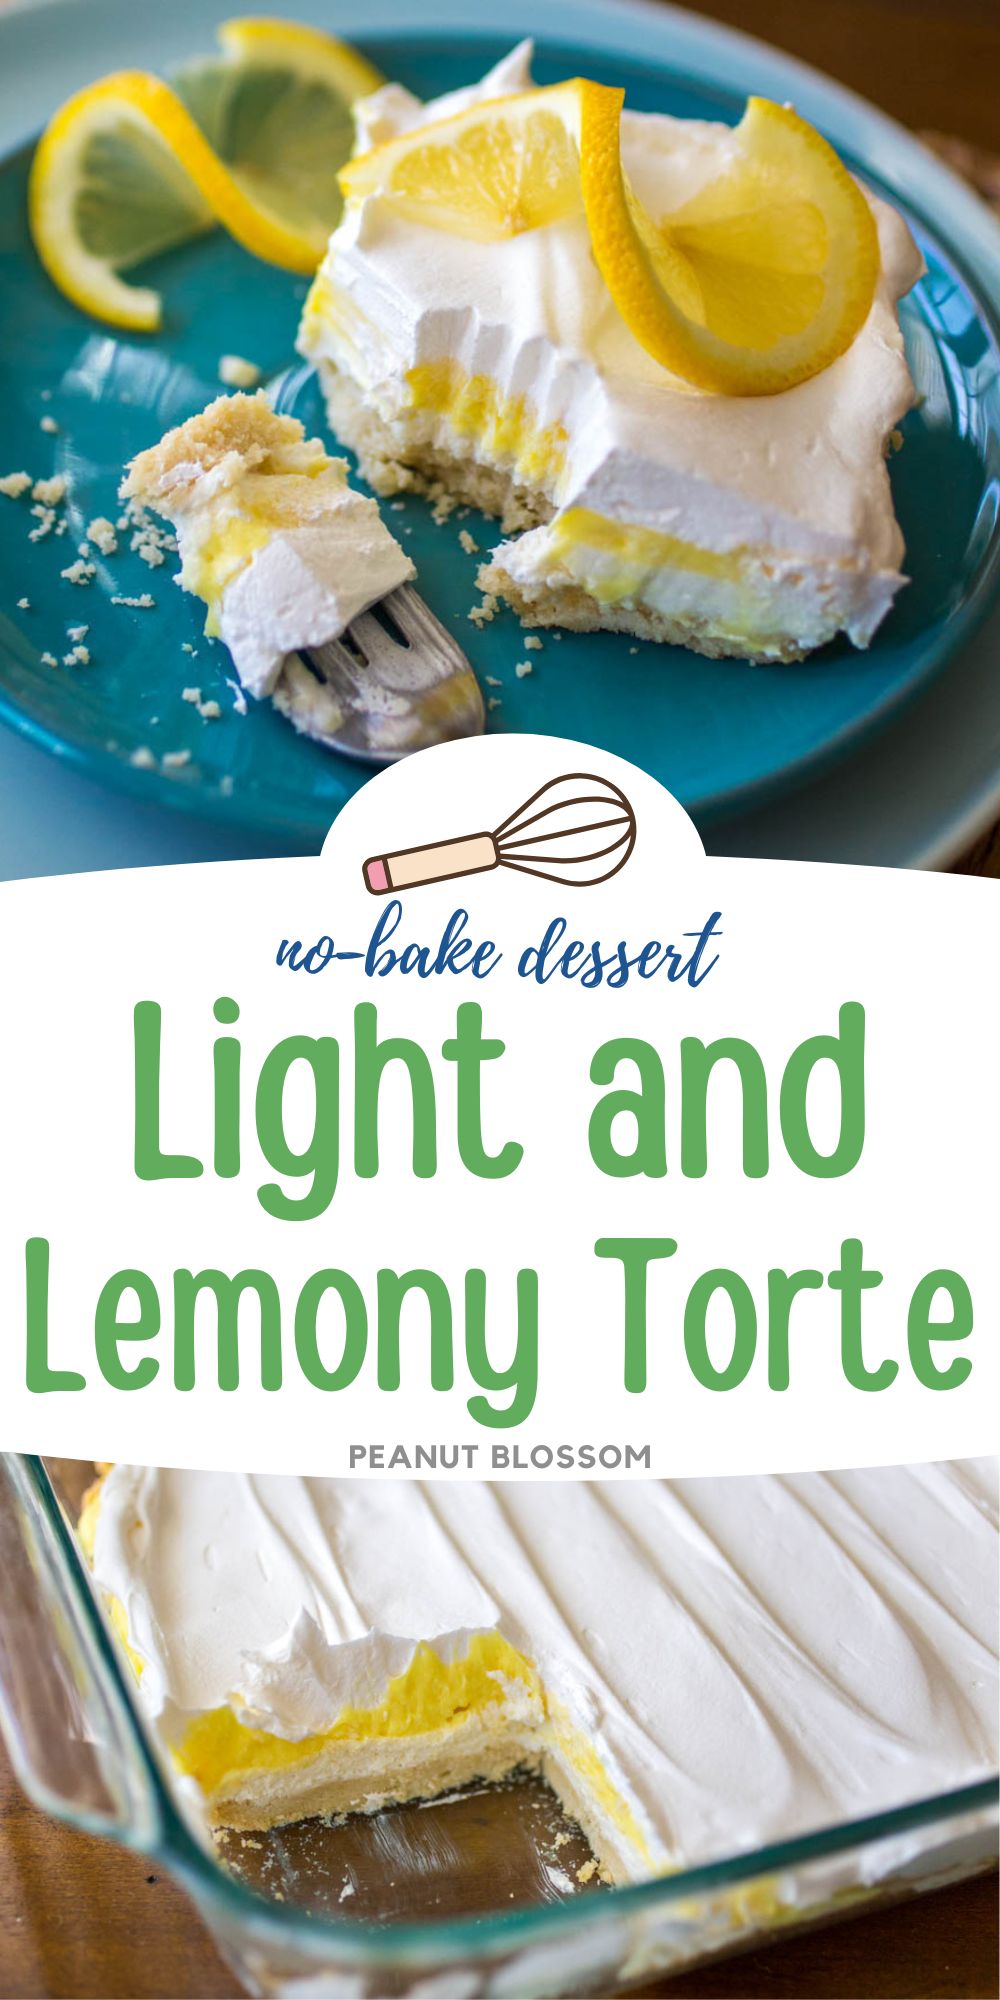 The photo collage shows a photo of a slice of the lemon torte with a fresh lemon twist on top next to a baking dish filled with the rest of the dessert.